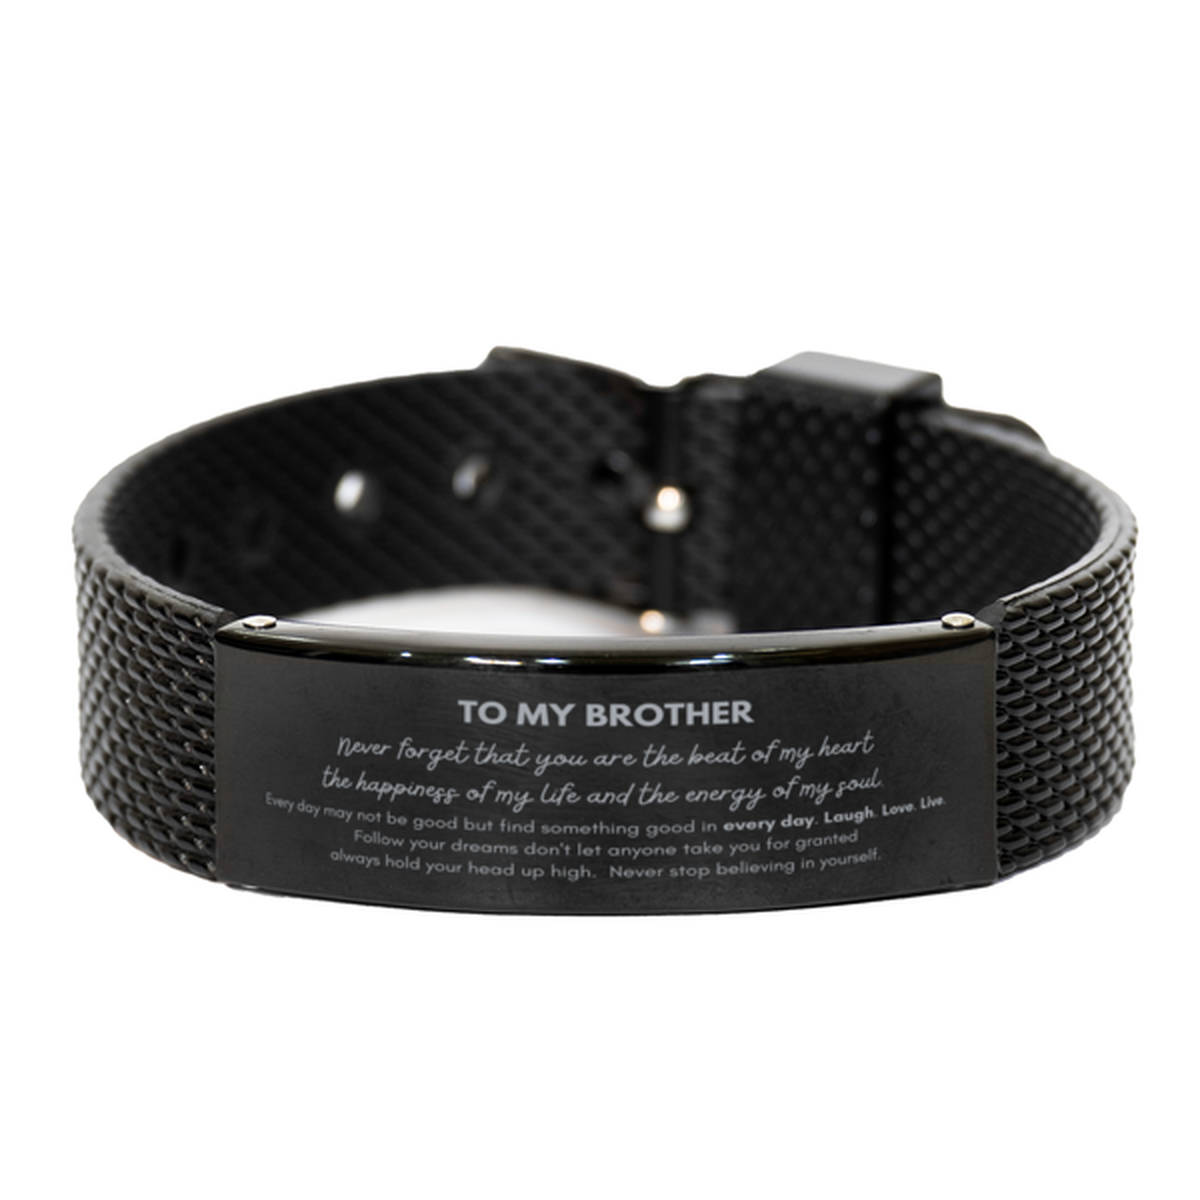 To My Brother Bracelet Gifts, Christmas Brother Black Shark Mesh Bracelet Present, Birthday Unique Motivational For Brother, To My Brother Never forget that you are the beat of my heart the happiness of my life and the energy of my soul